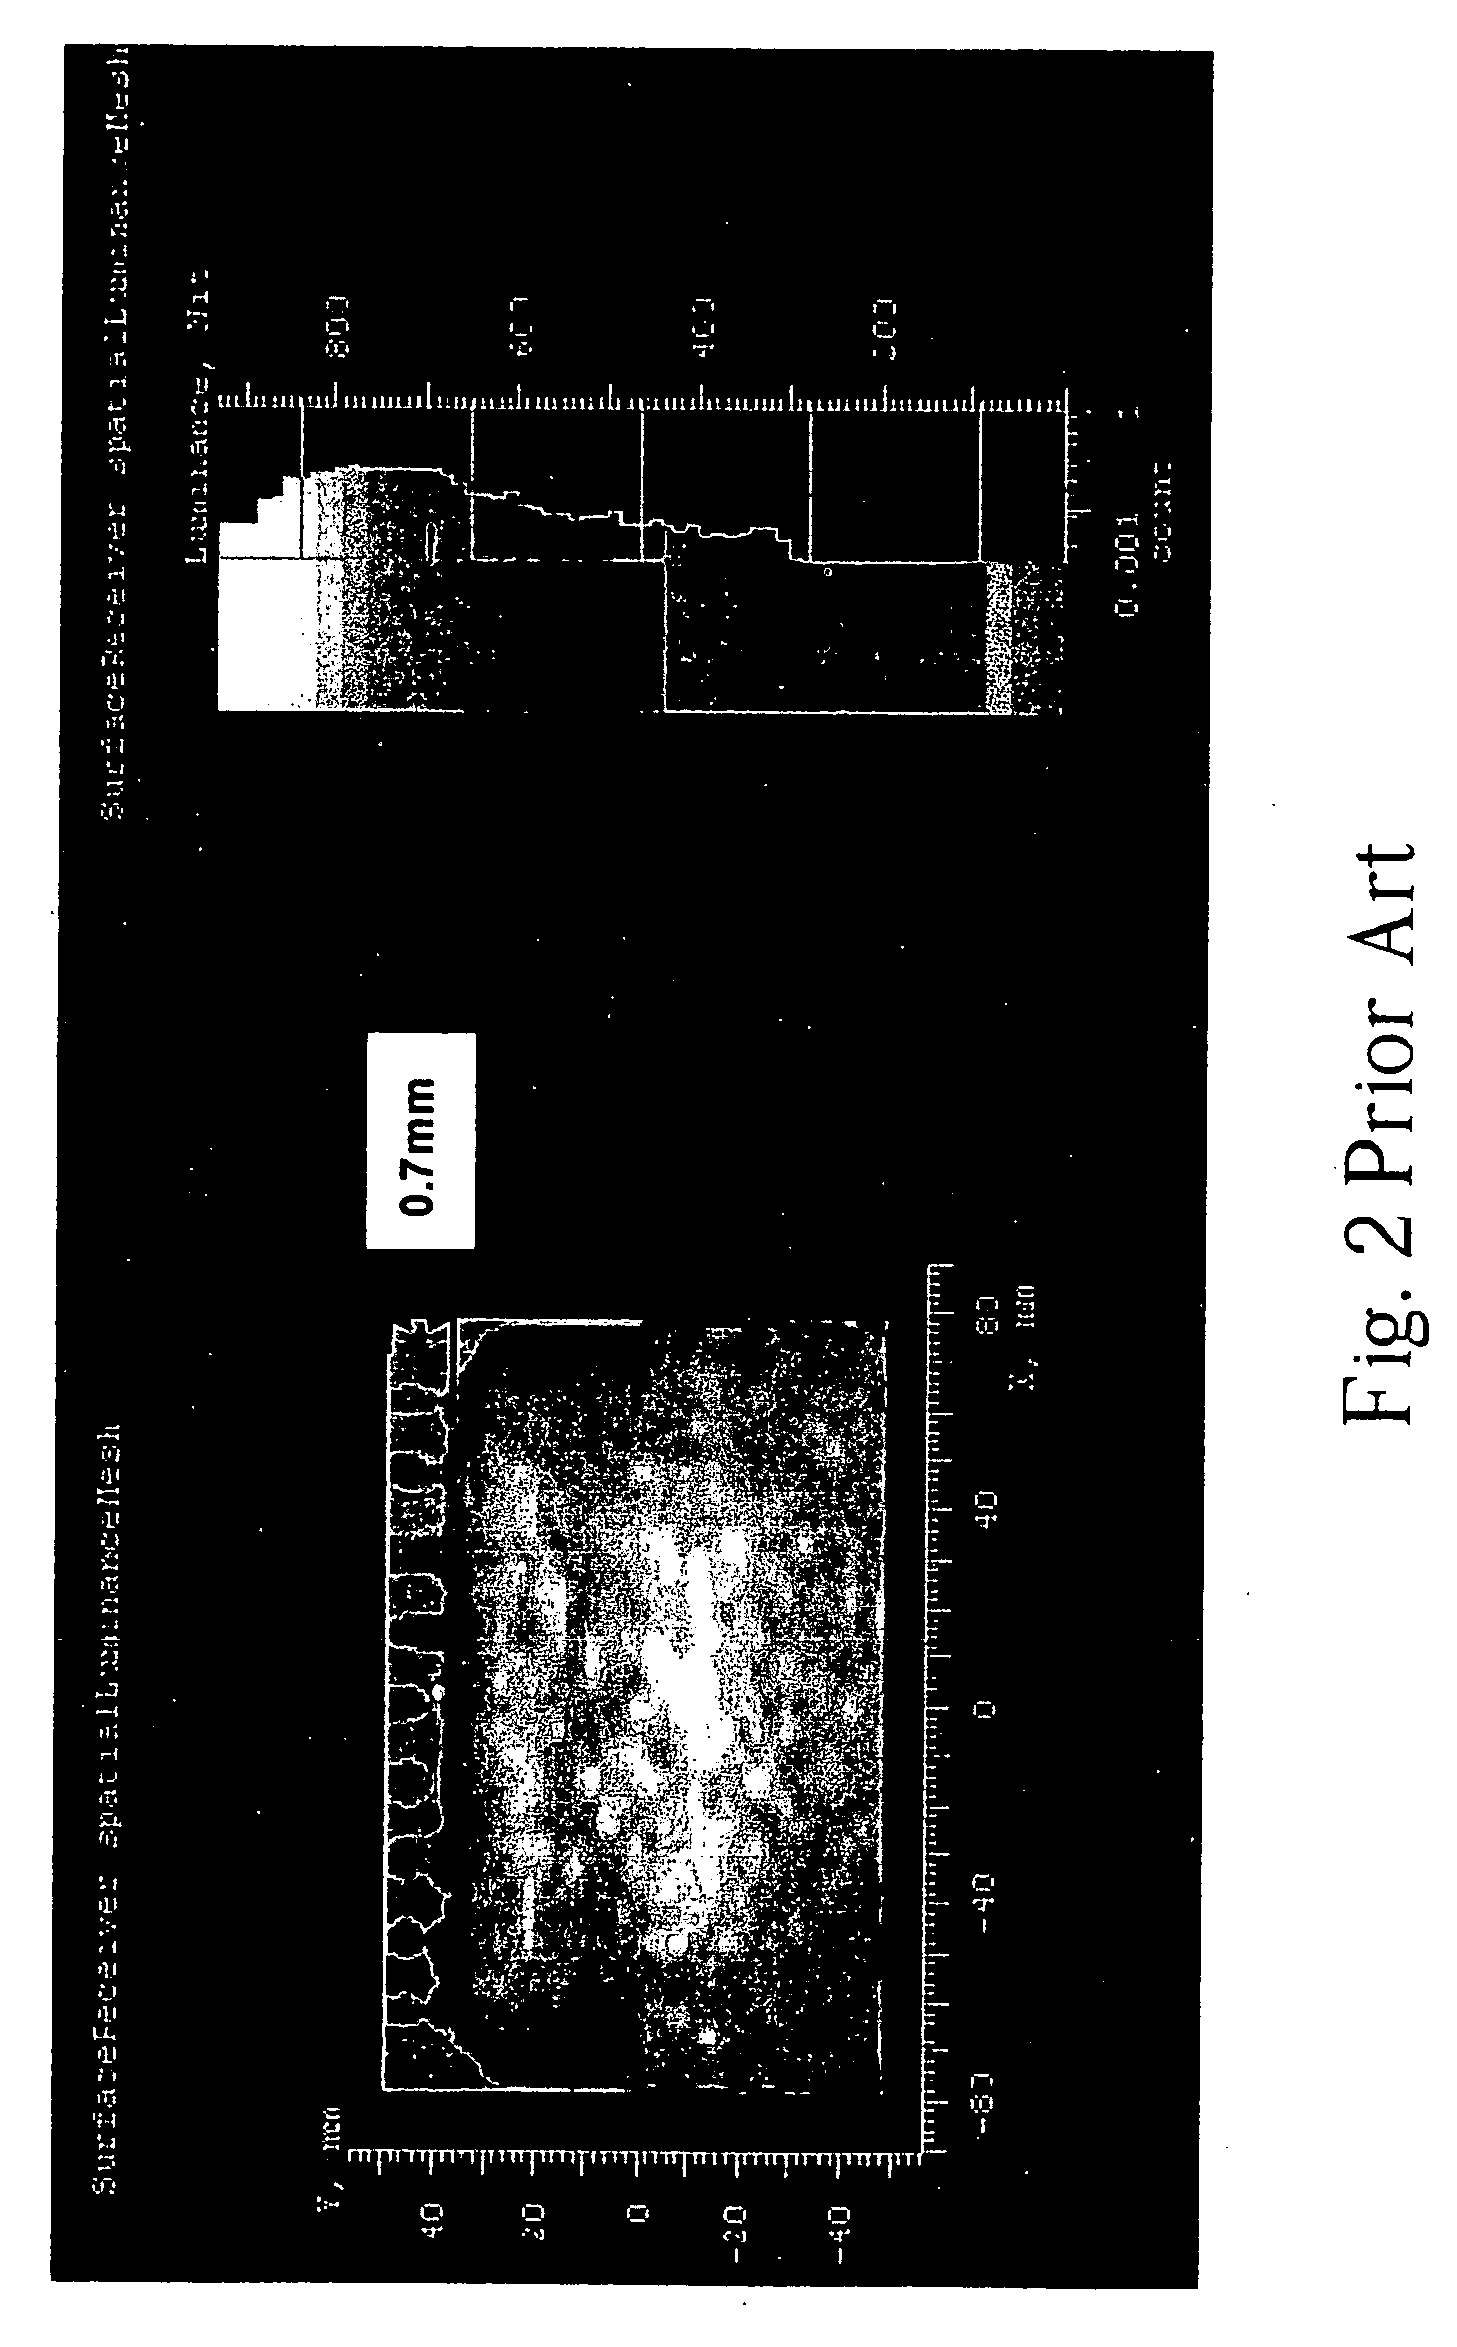 Systems for providing backlight module with stacked light source